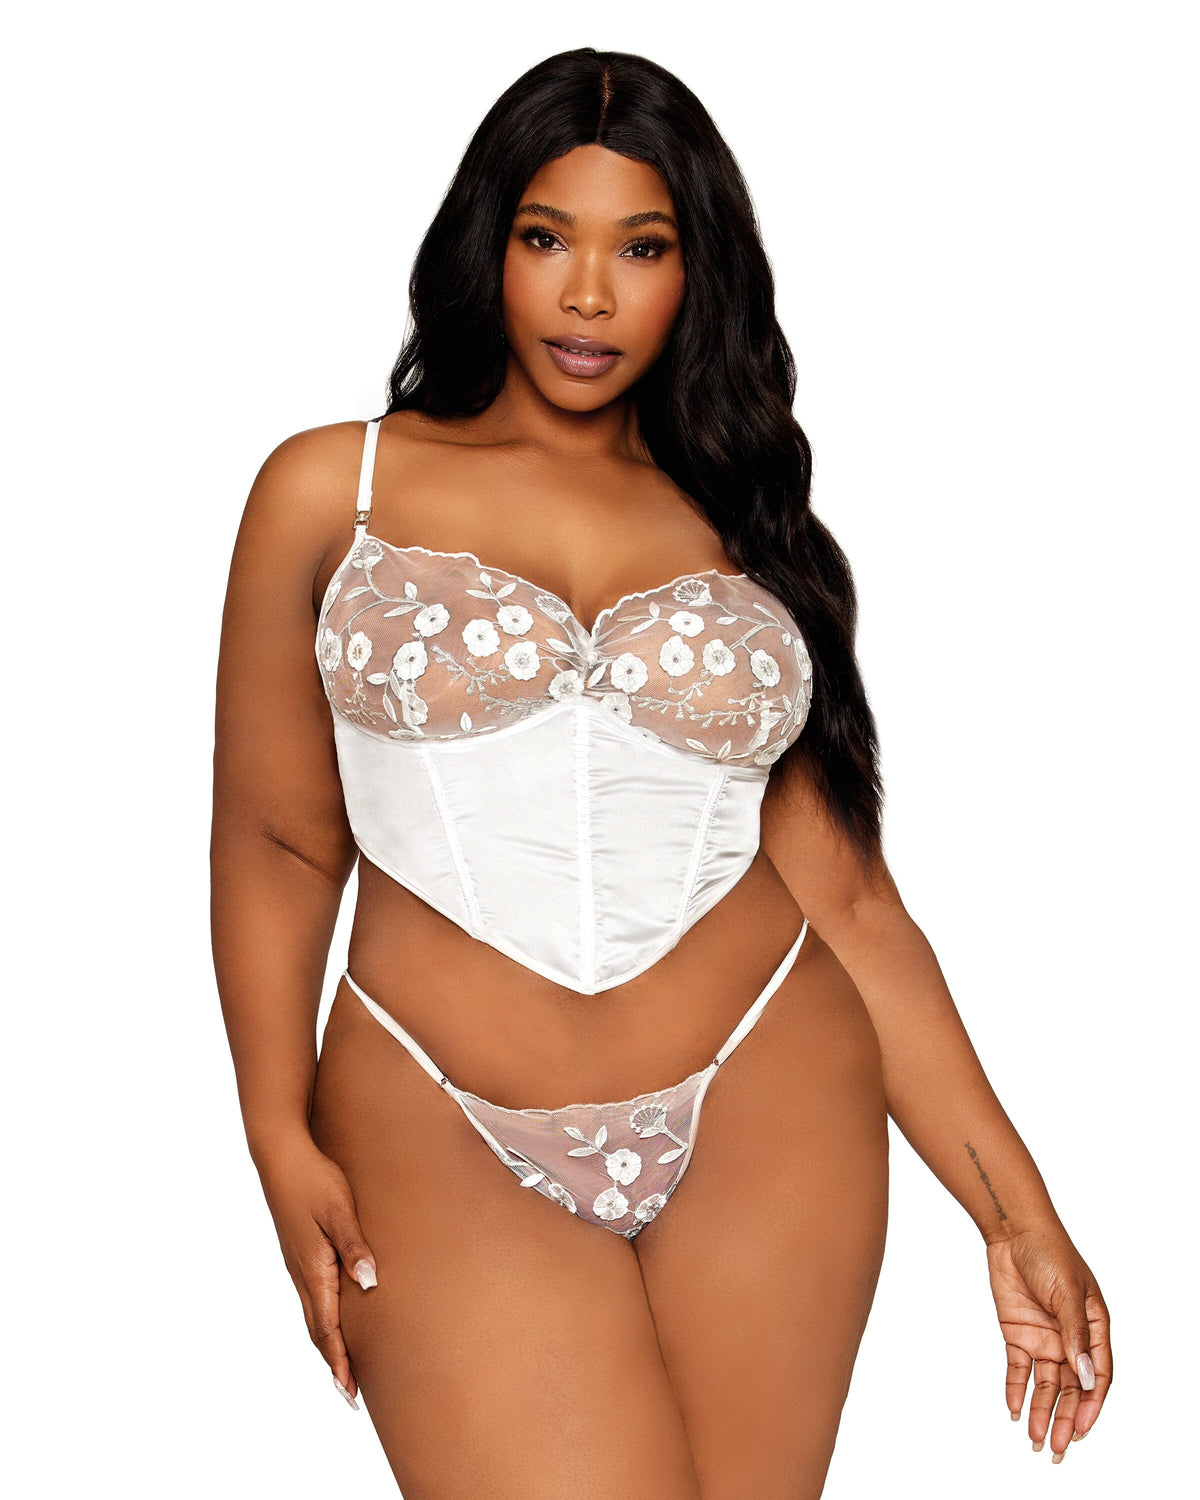 Dreamgirl Plus Size Satin and 3D Embroidery Bustier and G-string Set Bustier Dreamgirl 